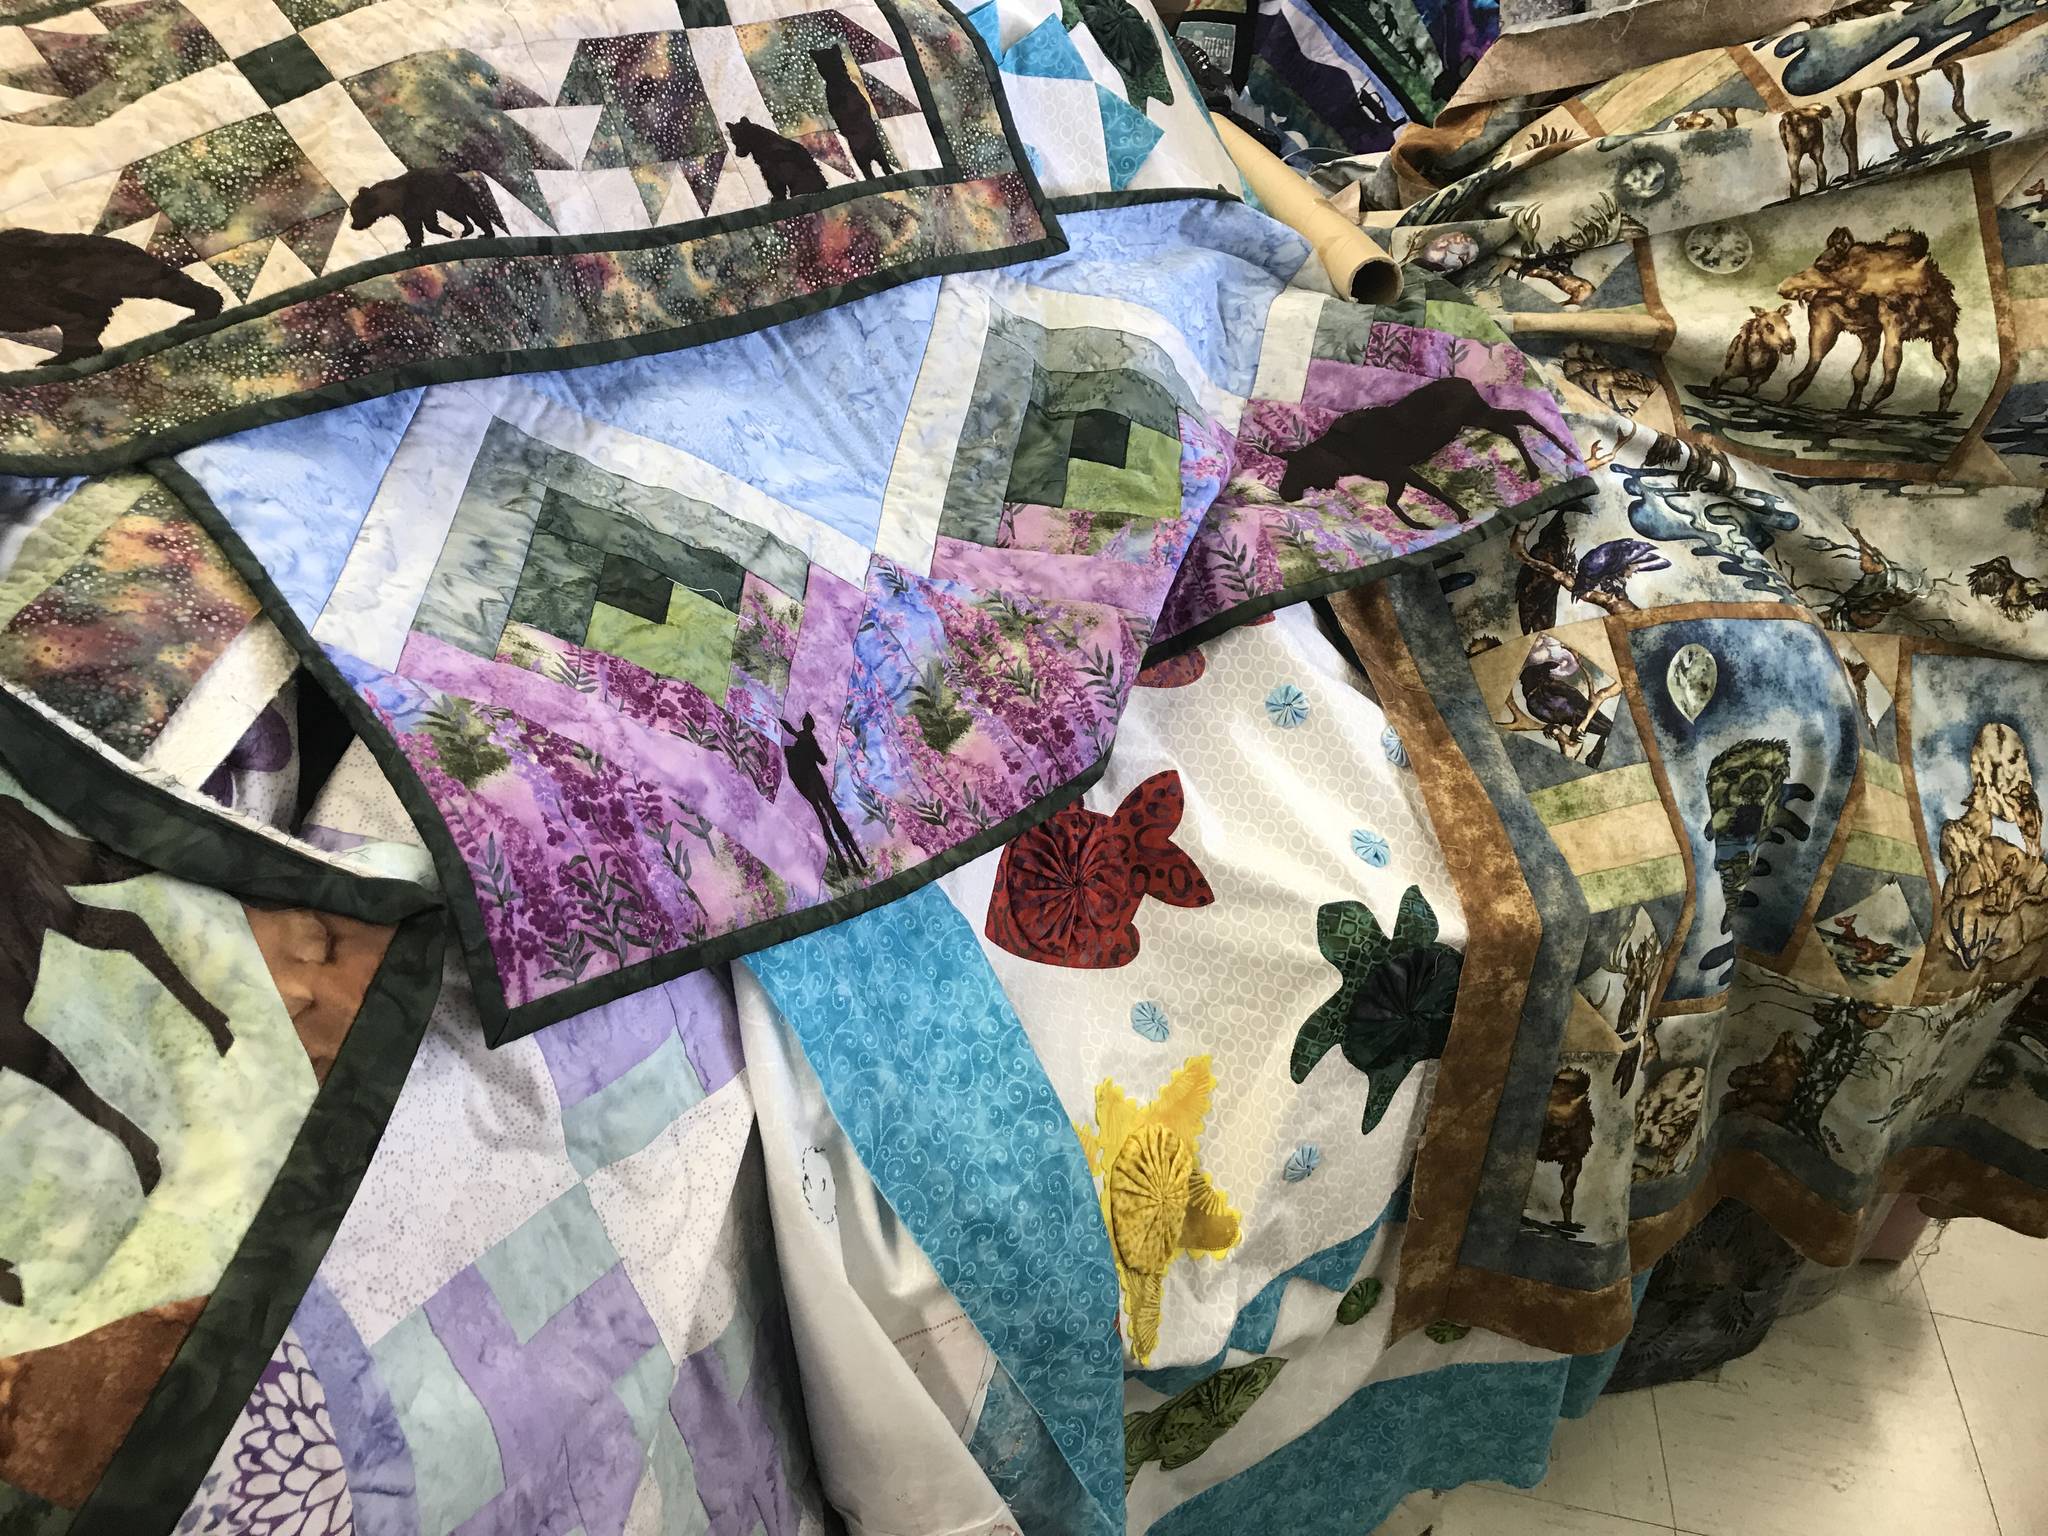 A selection of Dana Woodard’s quilted artwork is on display at her family’s store, Kenai Fabric Center, in Kenai. Gwen Woodard, Dana’s mother, says that a major part of their sales are based on Dana’s designs and patterns. (Photo by Kat Sorensen/Peninsula Clarion)